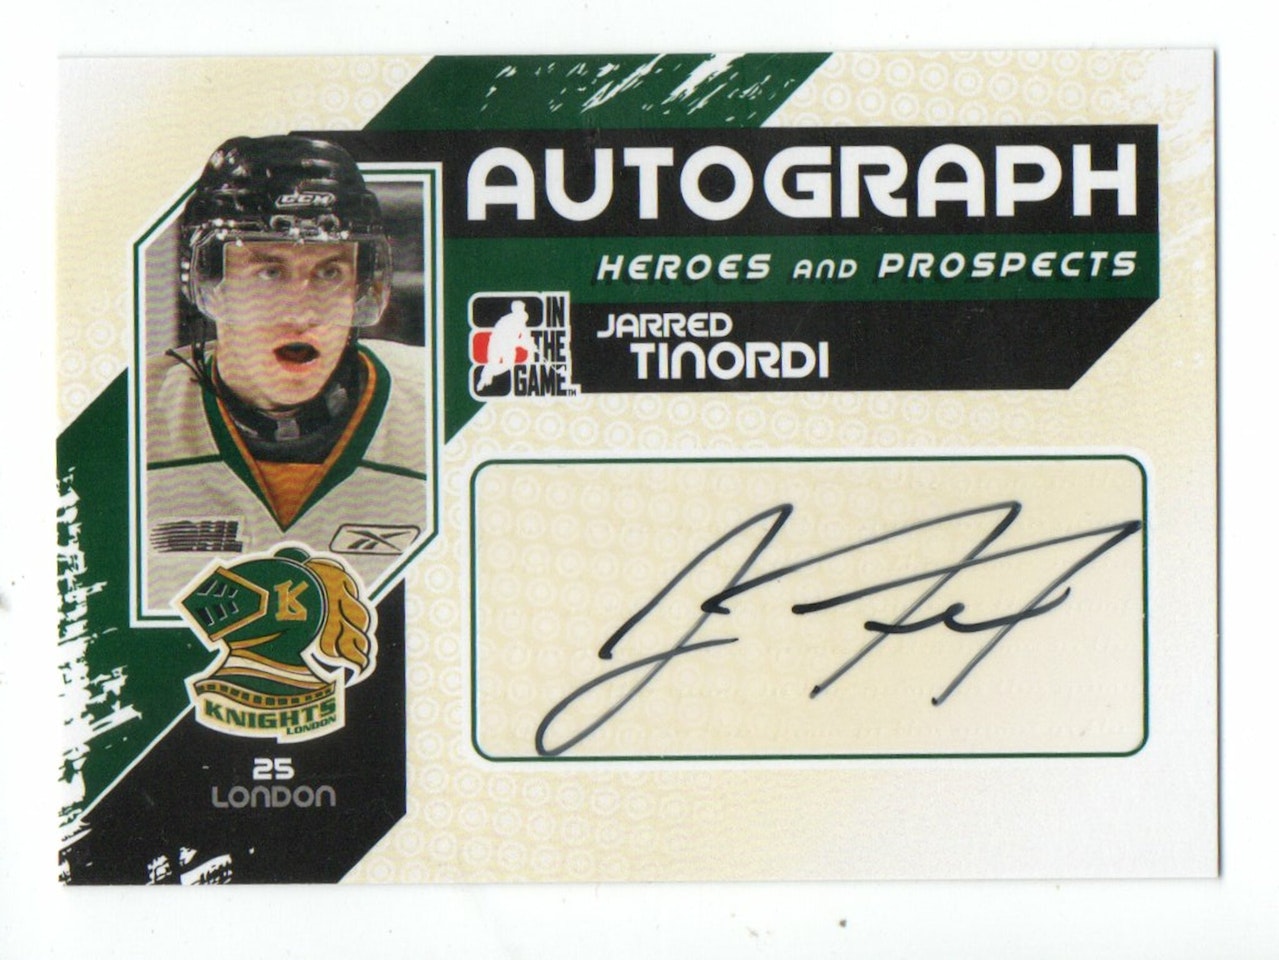 2010-11 ITG Heroes and Prospects Autographs #AJT Jarred Tinordi (40-193x3-CANADIENS)